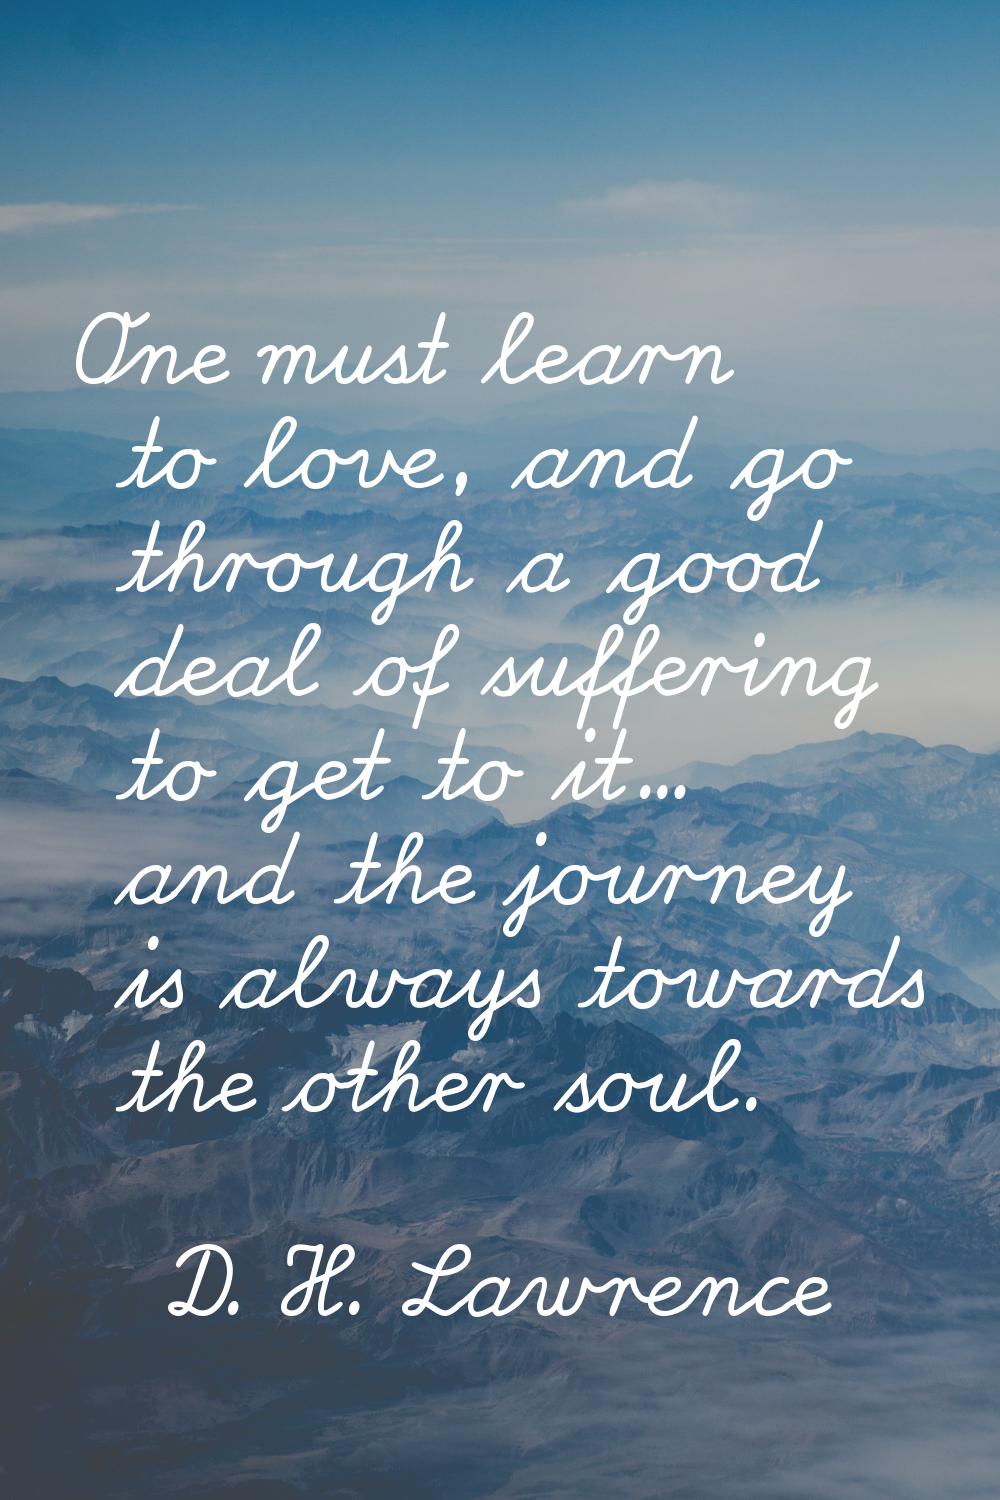 One must learn to love, and go through a good deal of suffering to get to it... and the journey is 